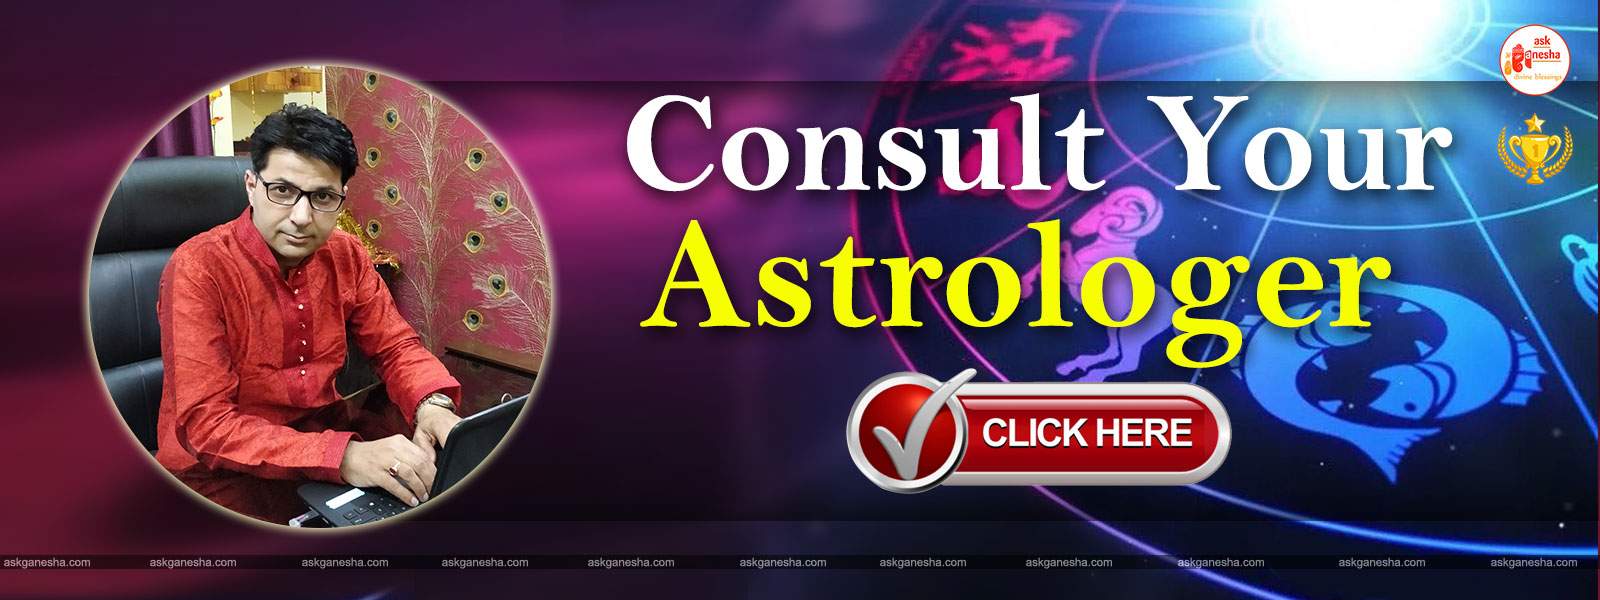 Consult Your Astrologer